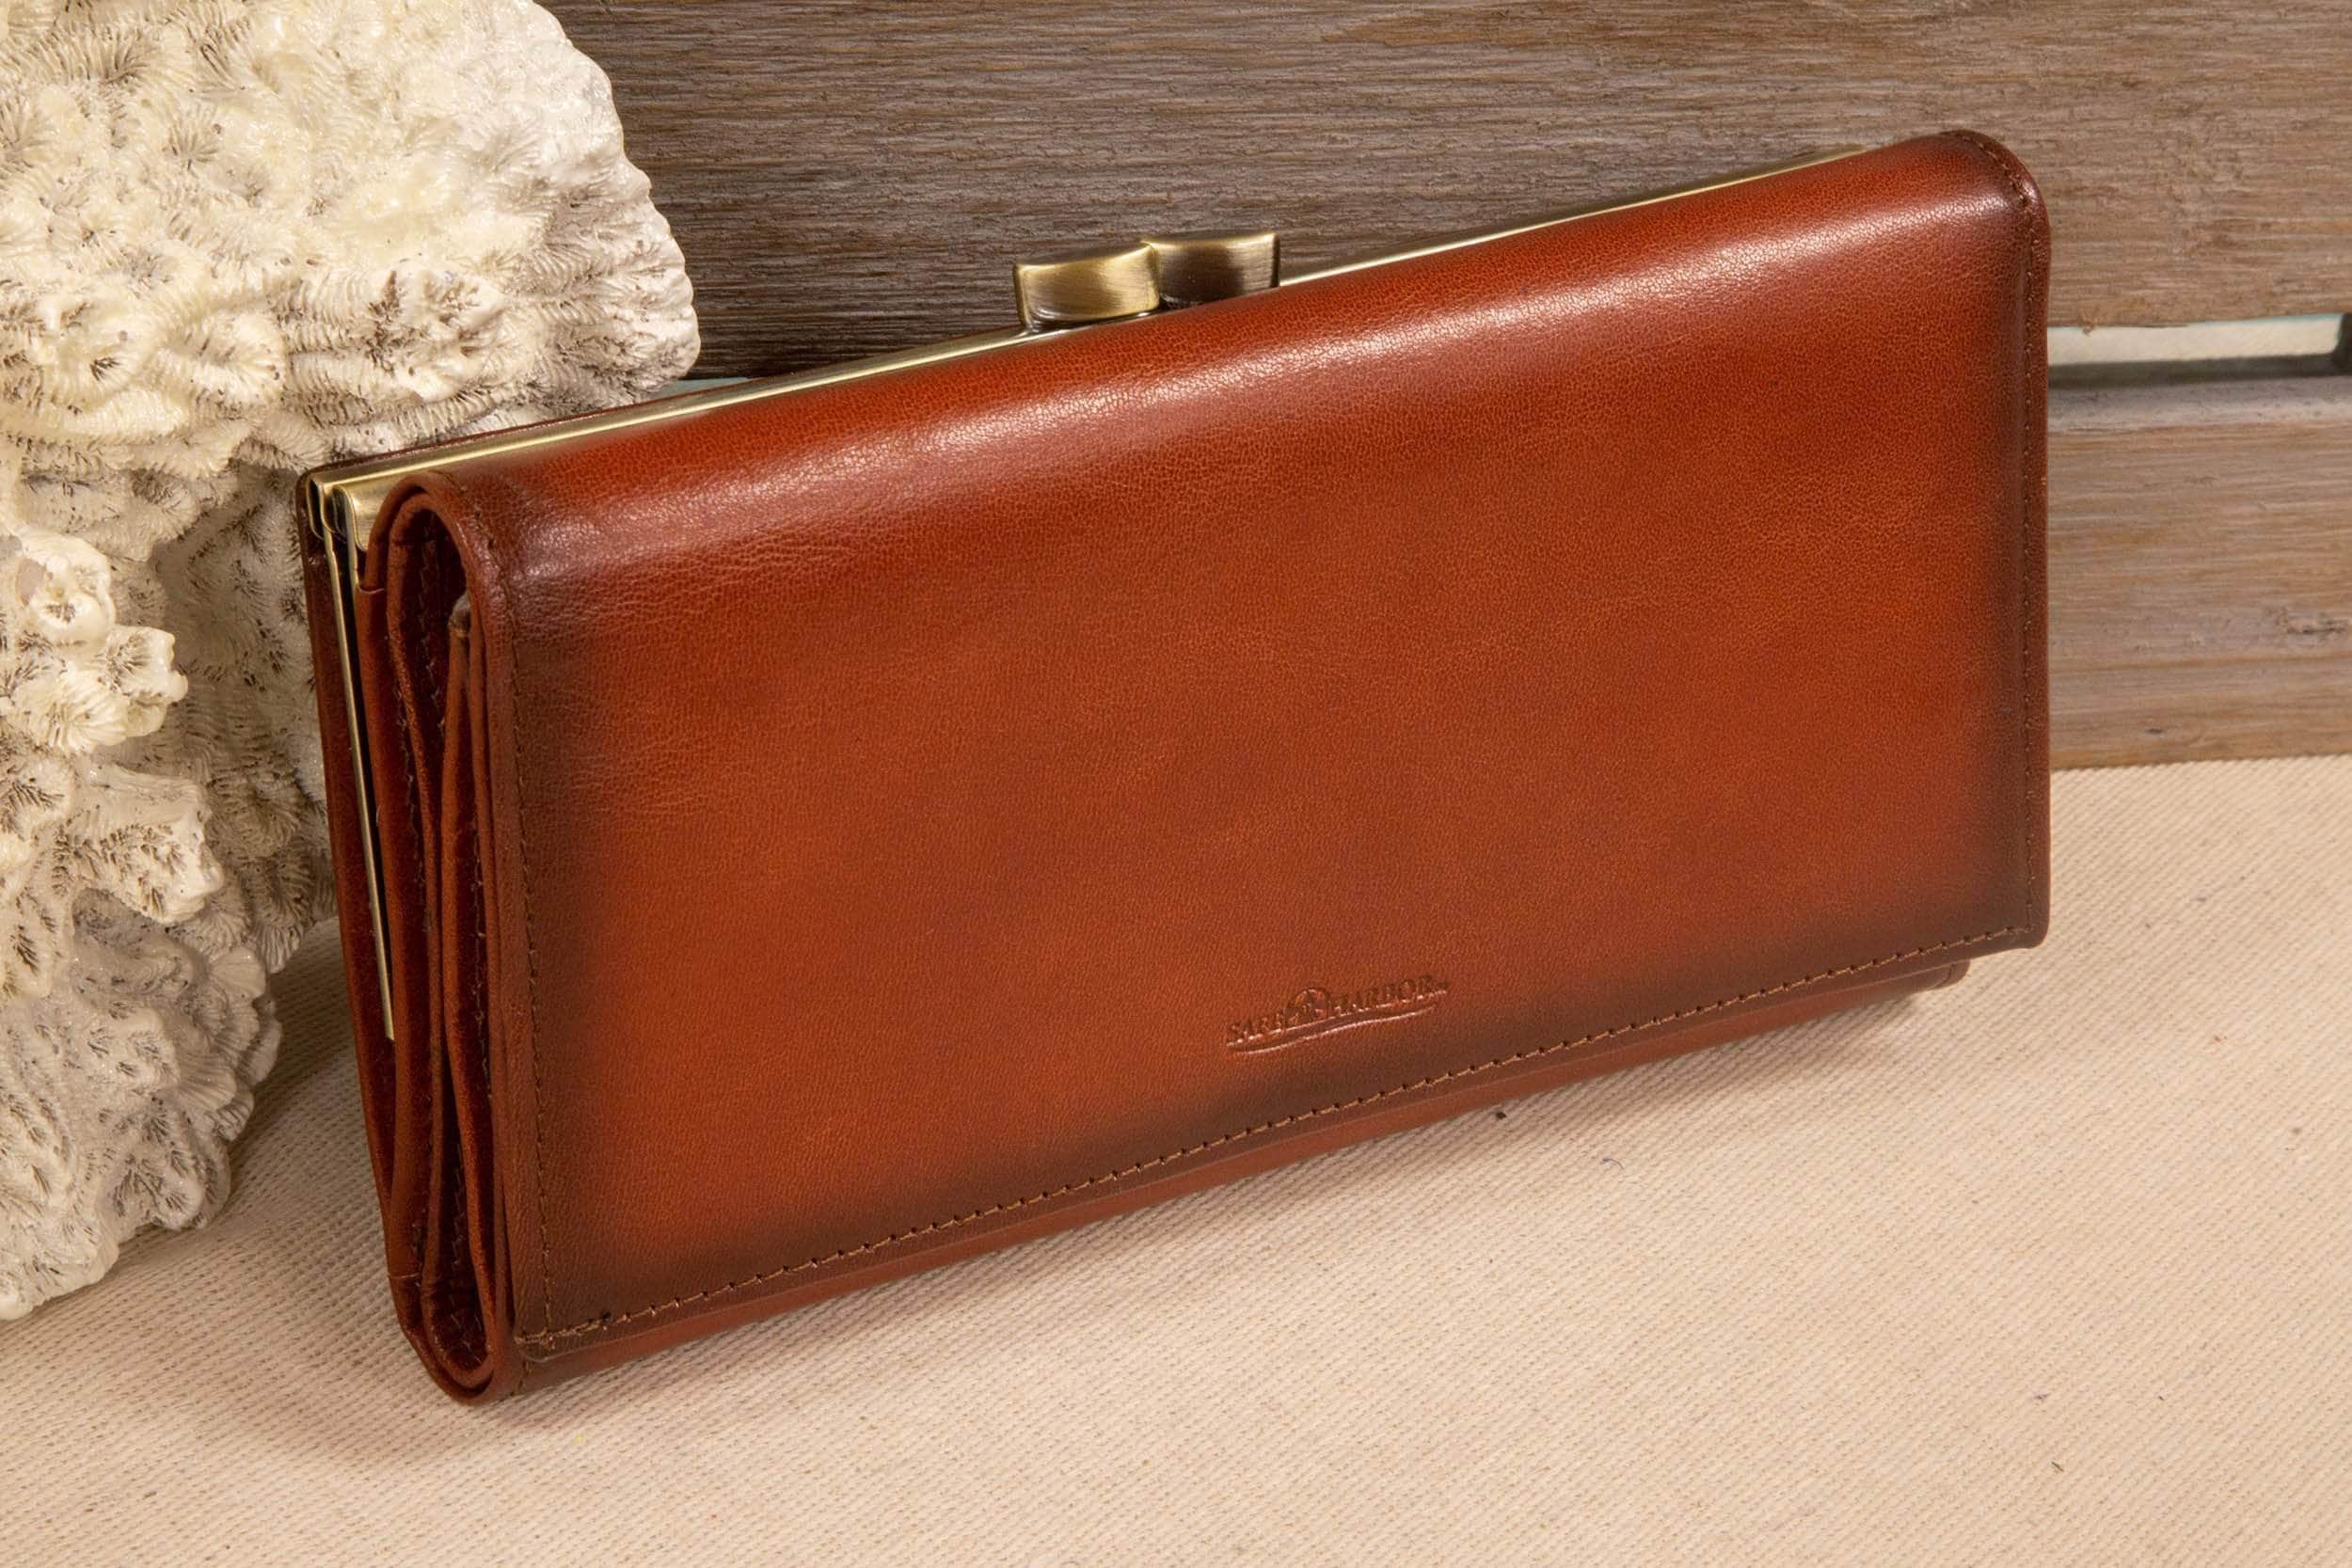 ID Stronghold Safe Harbor Ladies Wallet Light Brown Safe Harbor Womens Wallet - RFID Antique Kiss Clasp Clutch